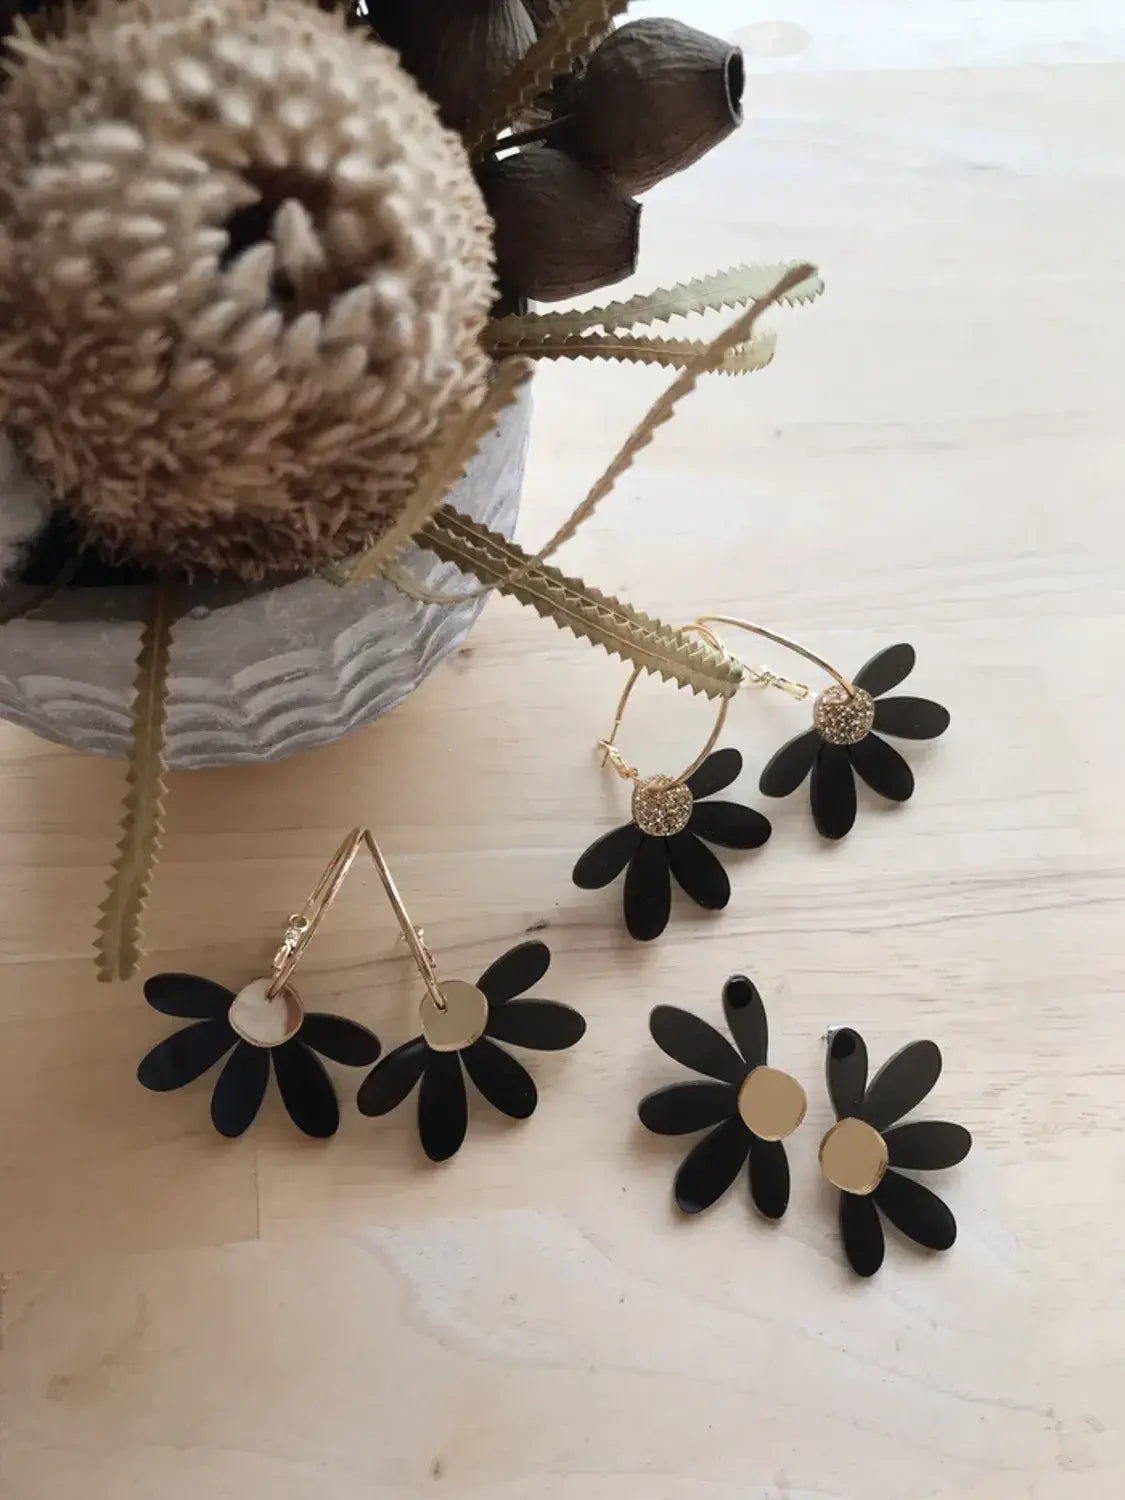 Jumbo Daisy Hoop Earrings in Black &amp; Gold by Foxie Collective.